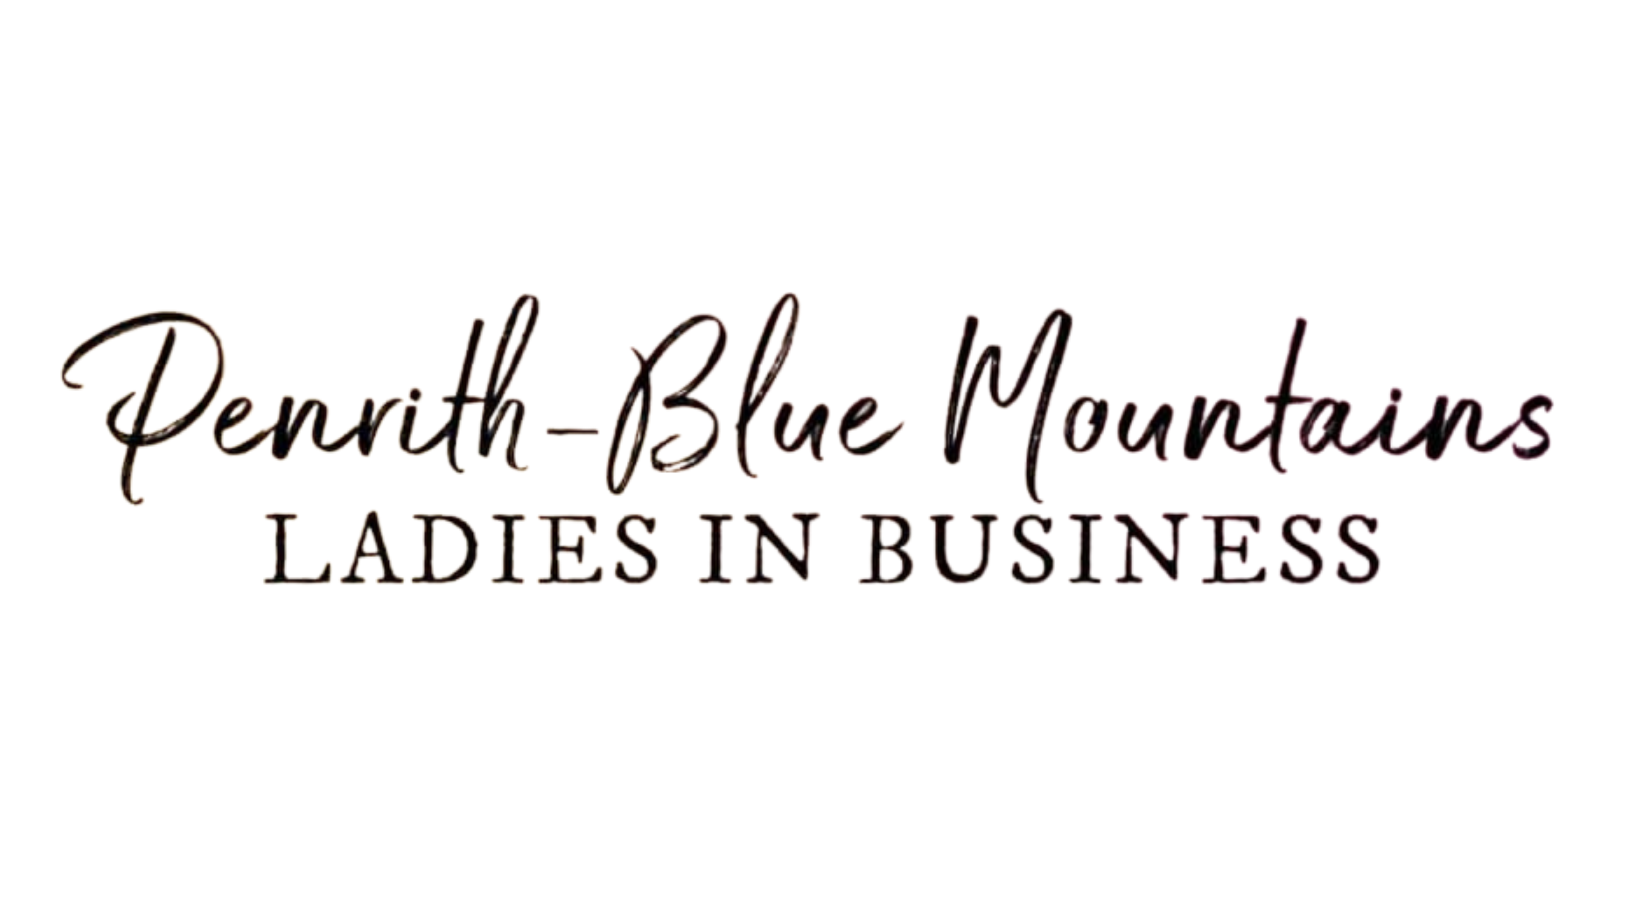 Penrith Blue Mountains Ladies in Business